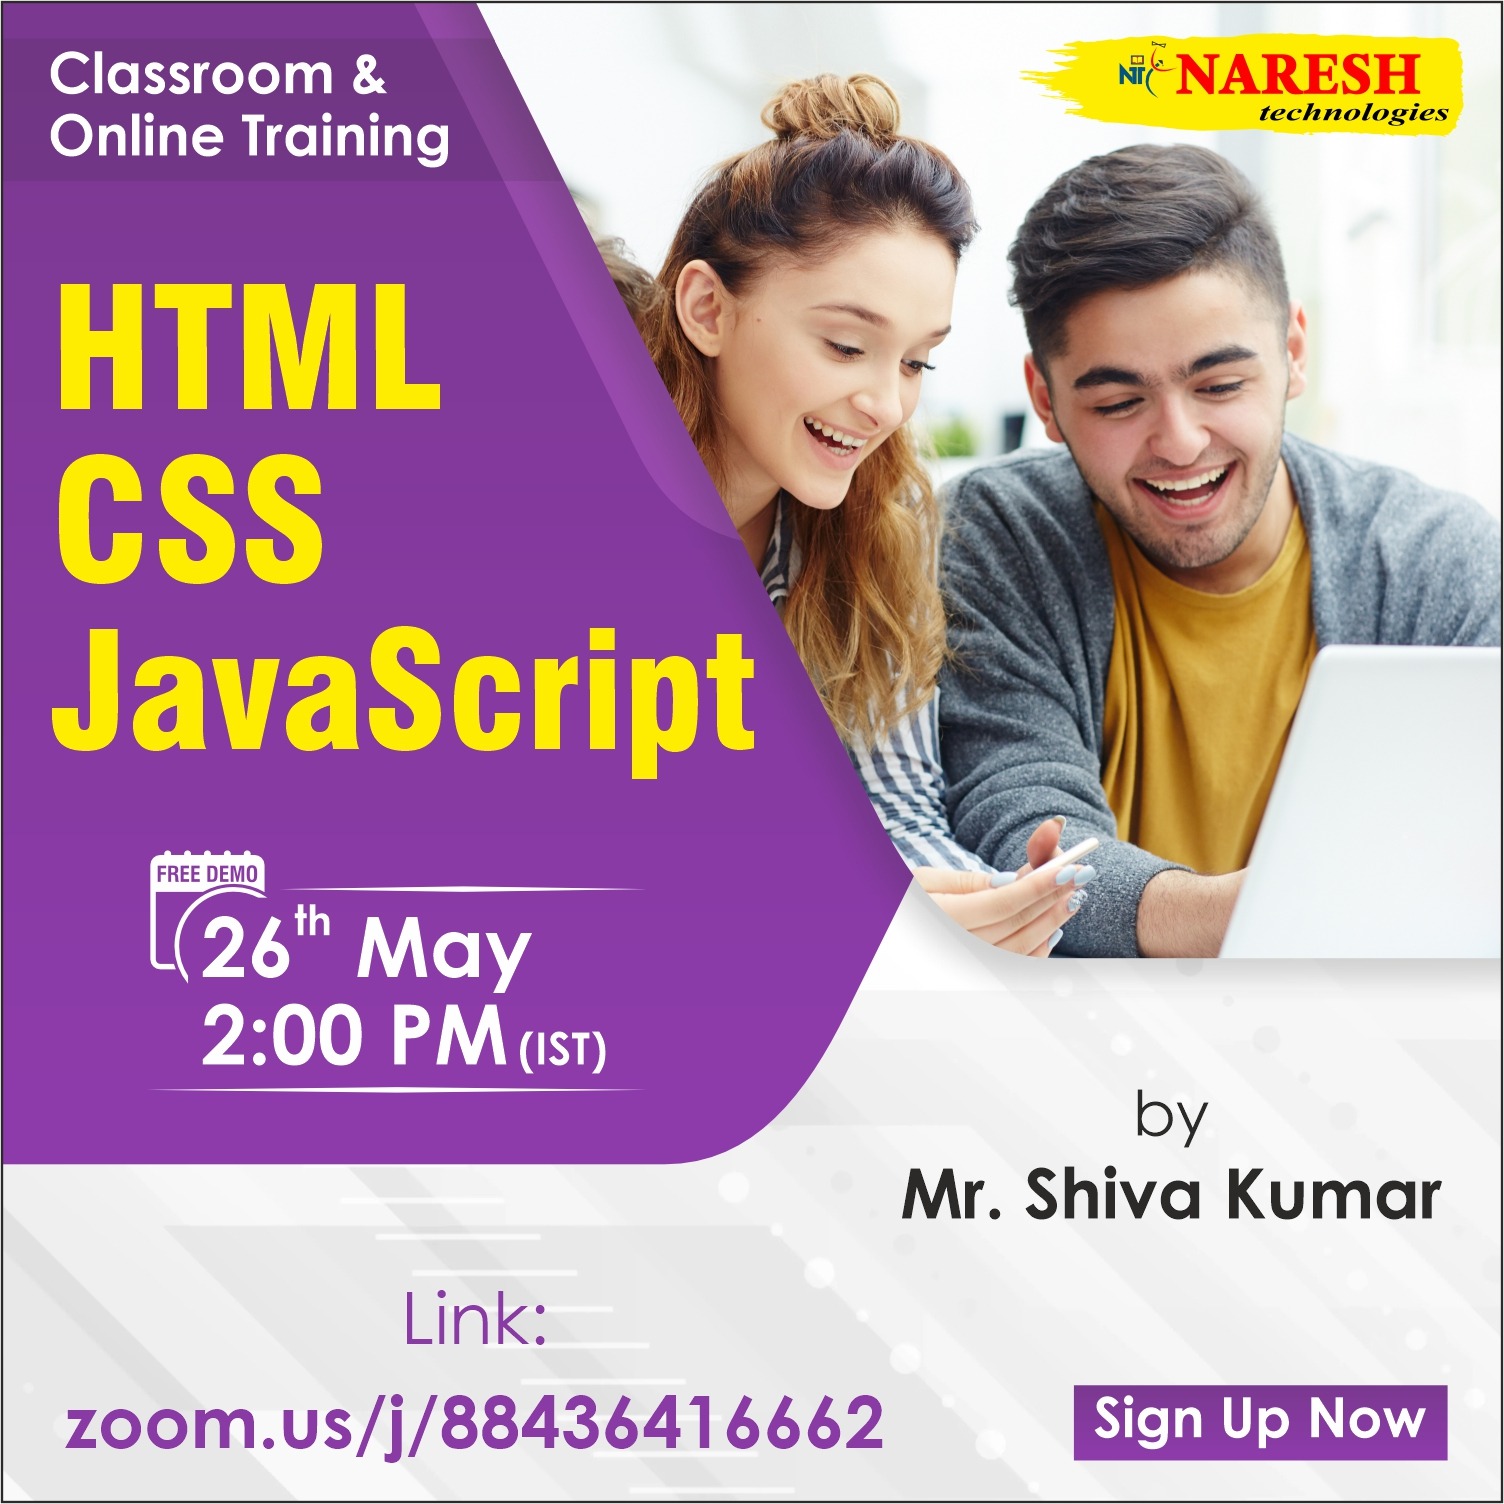 Free Demo on Html | CSS | JavaScript Training Course in NareshIT - 91-8179191999, Online Event